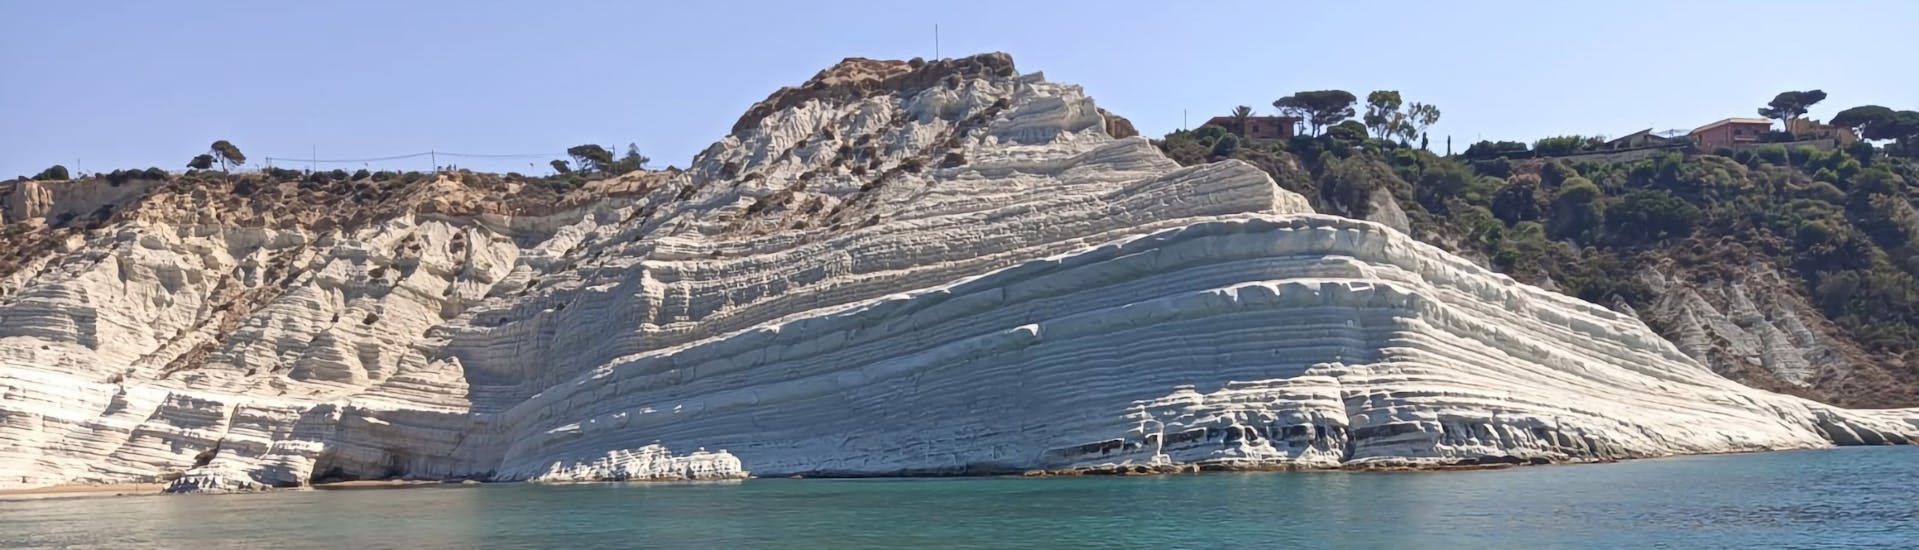 Panoramic view of the Stair of the Turks during the private Boat trip from agrigento to Stair of Turks and Realmonte with Forte Mare Agrigento.